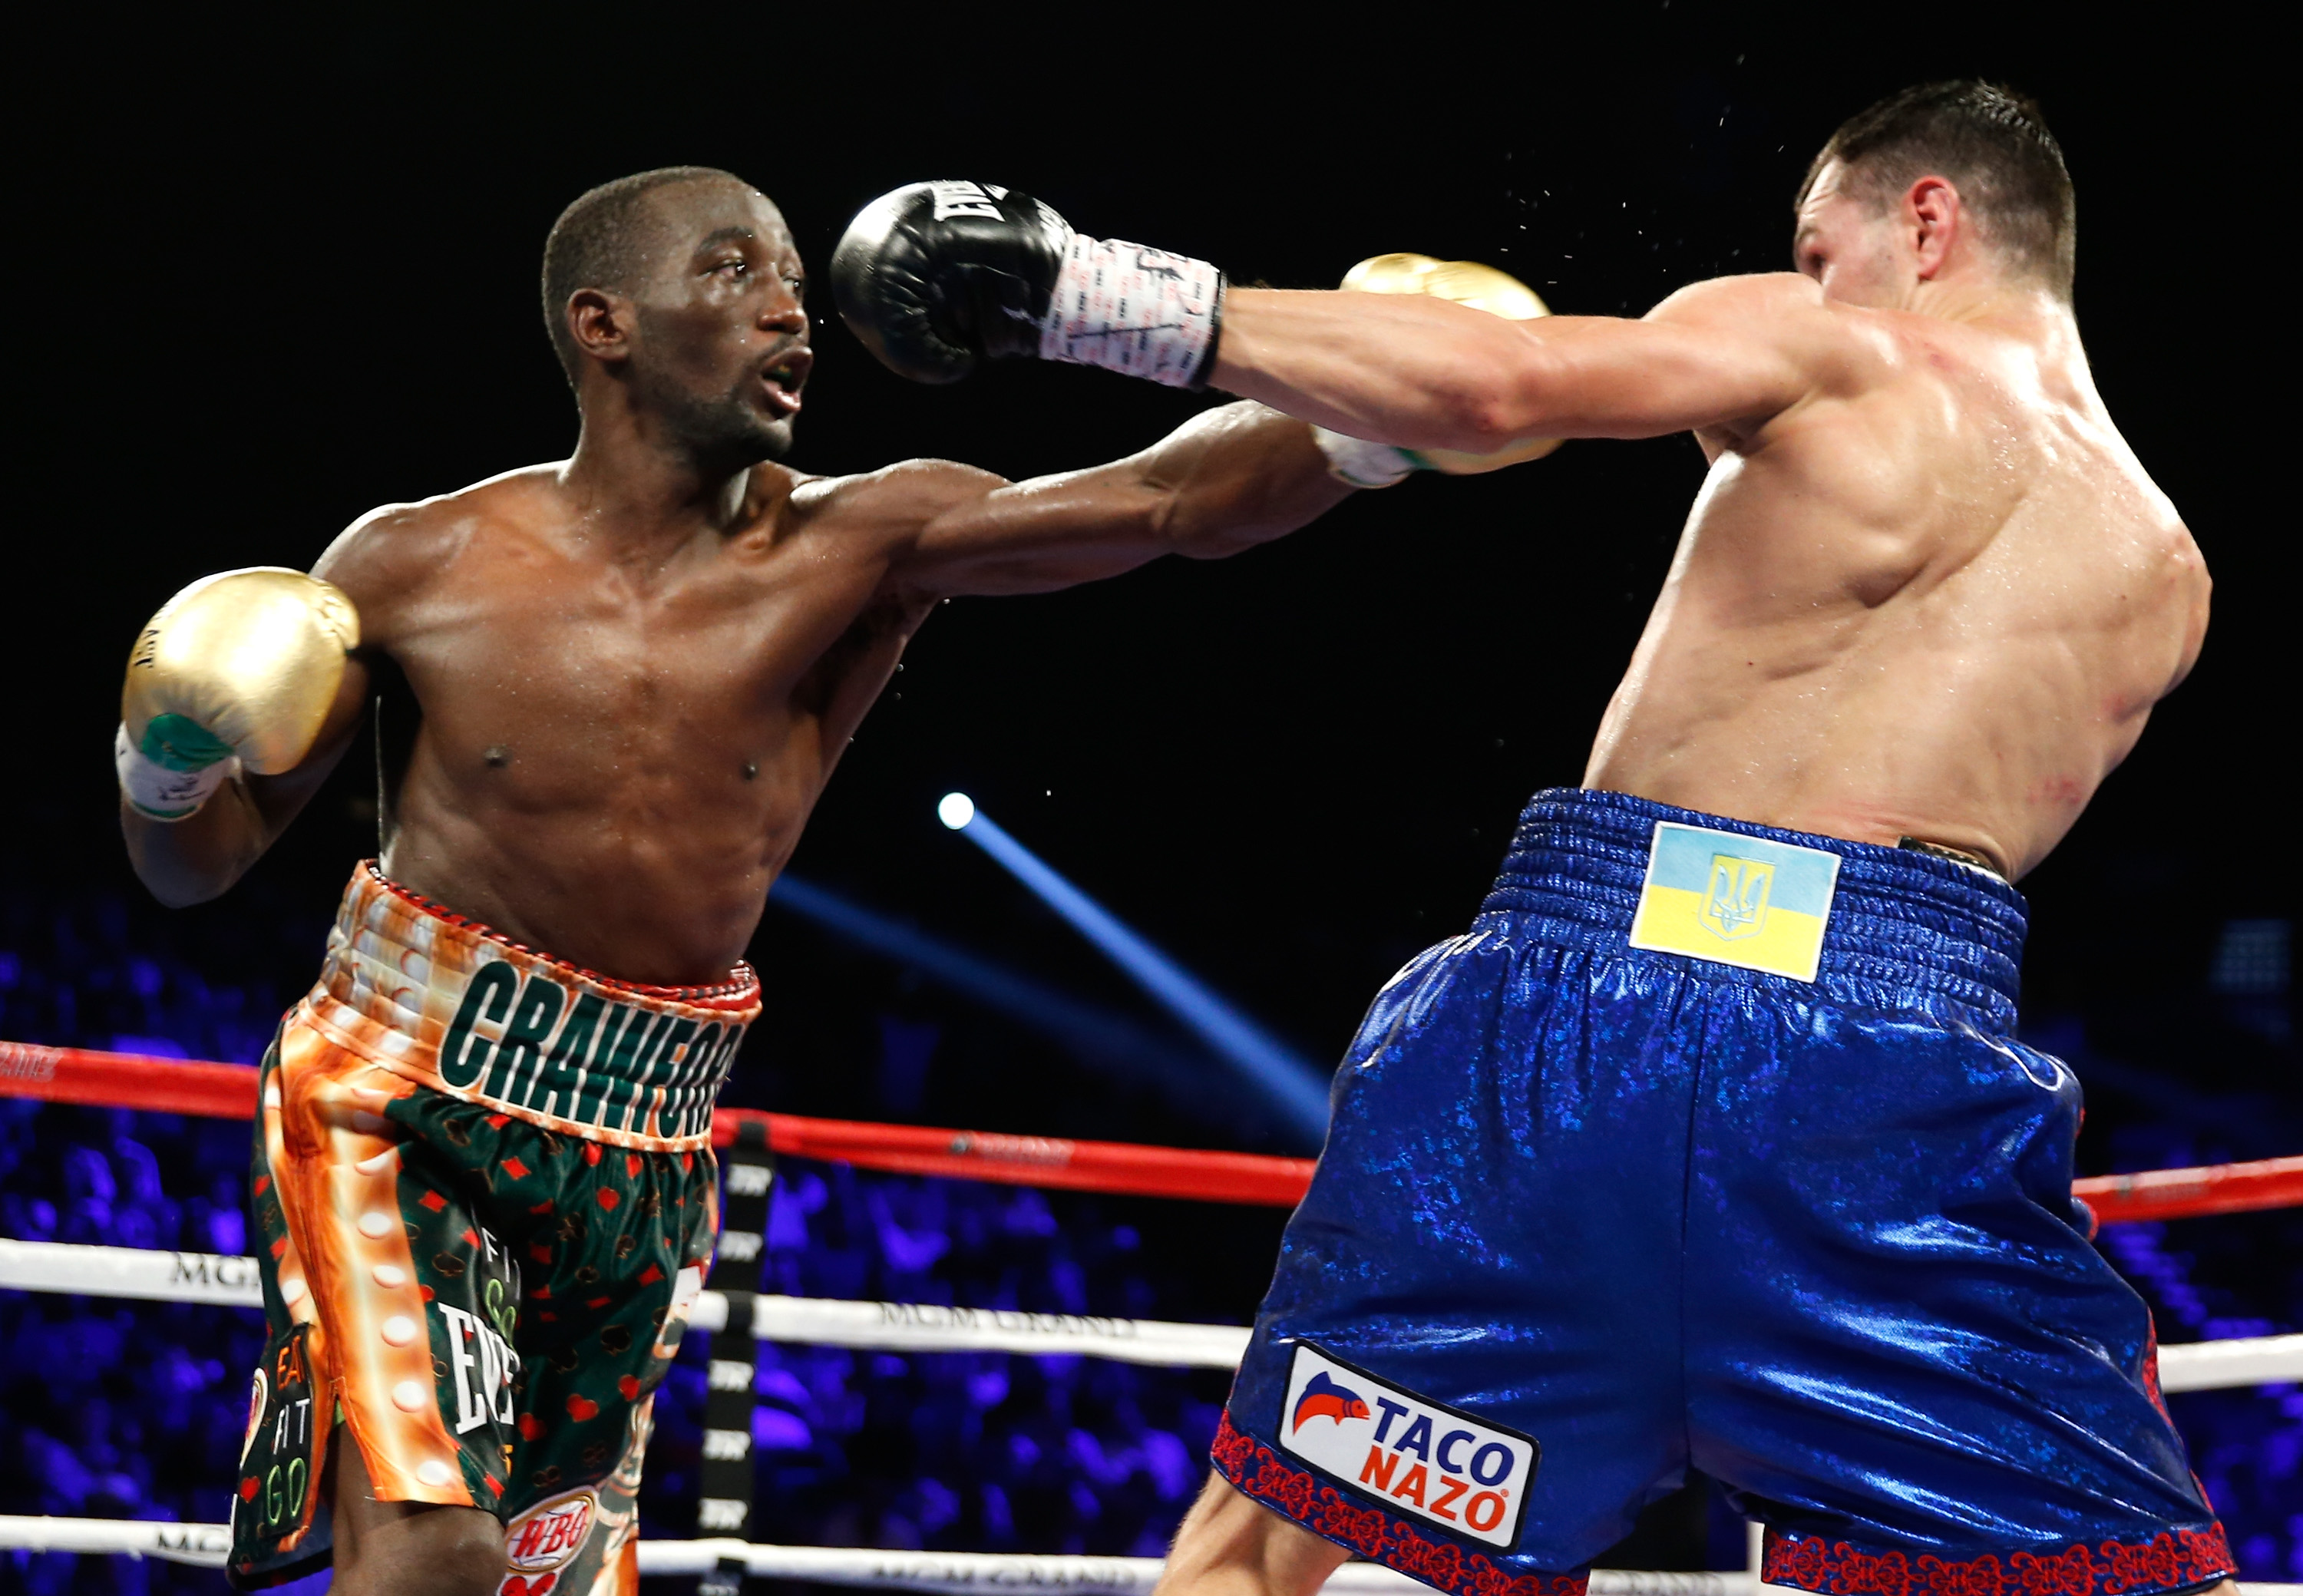 LAS VEGAS, NV - JULY 23: WBO junior weleterweight champion Terence Crawford (L) throws a punch at WBC champion Viktor Postol during their title unification fight at the MGM Grand Garden Arena on July 23, 2016 in Las Vegas, Nevada. Crawford won the fight by unanimous decision.   Steve Marcus/Getty Images/AFP